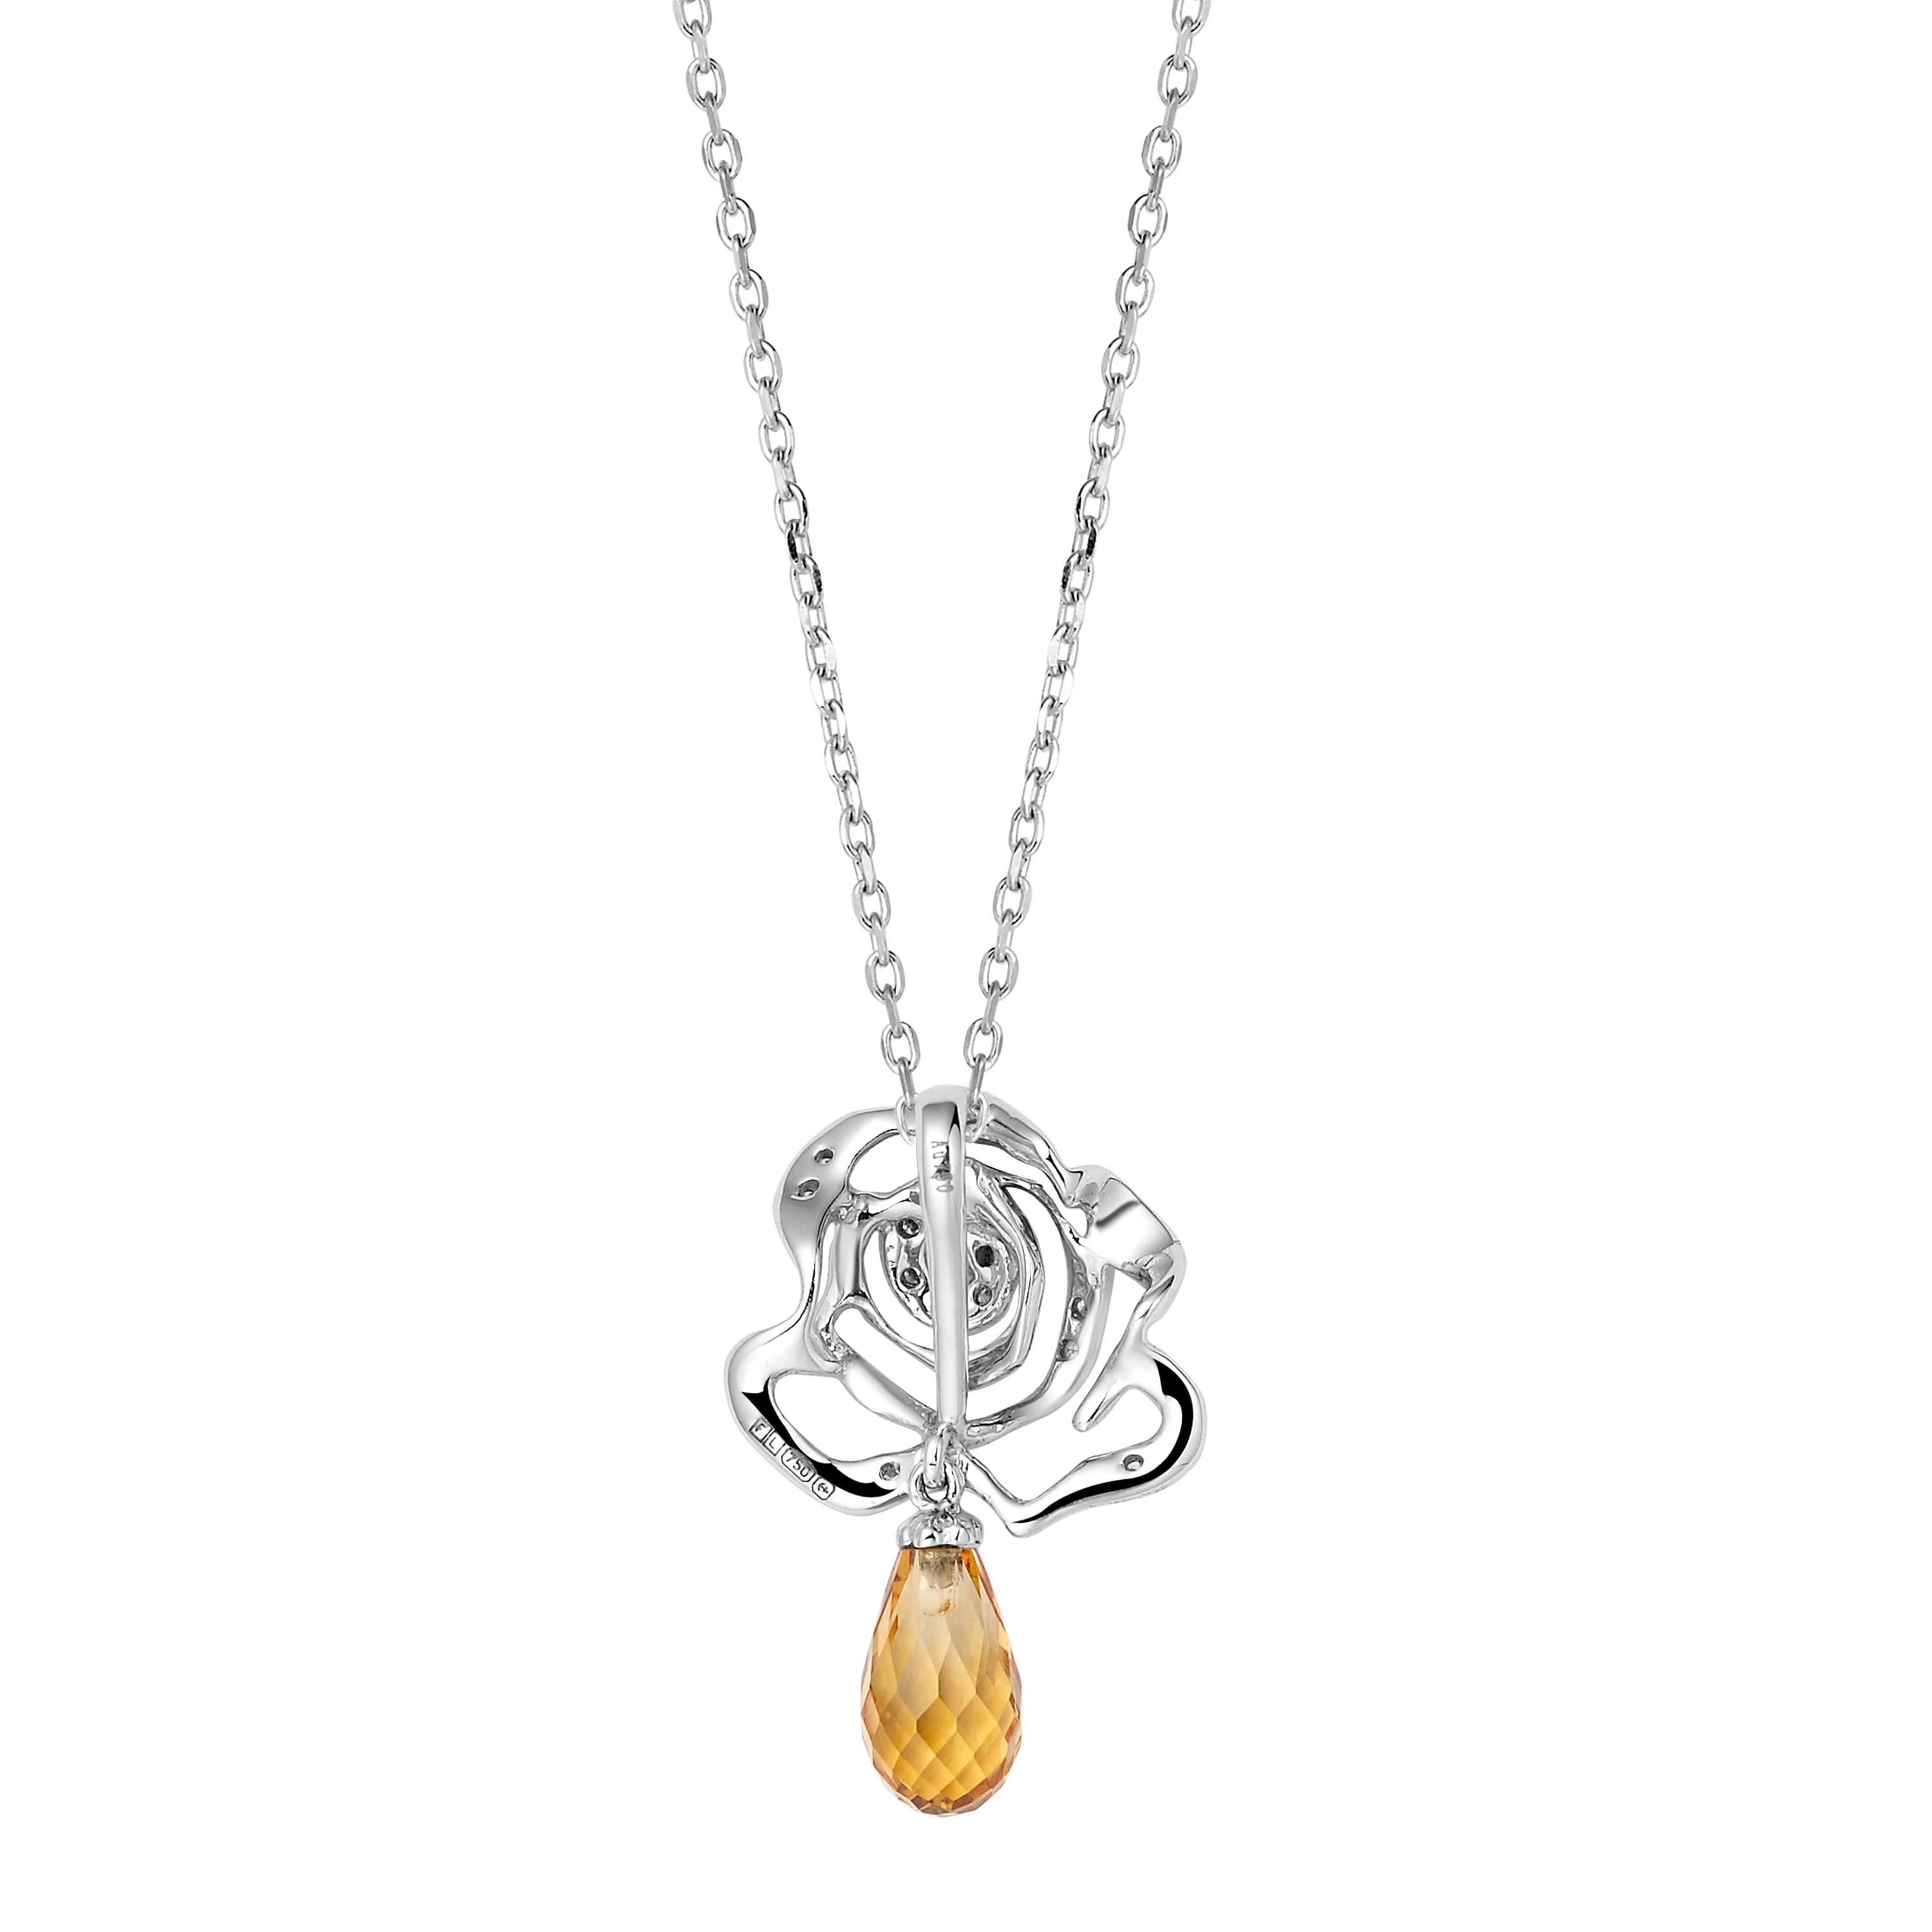 Description:
As enchanting as the real-life flower, the Rose collection offers a modern yet feminine look. This pendant features delicate 18ct white gold rose set with 0.02ct diamond and suspends a vibrant 0.8ct citrine